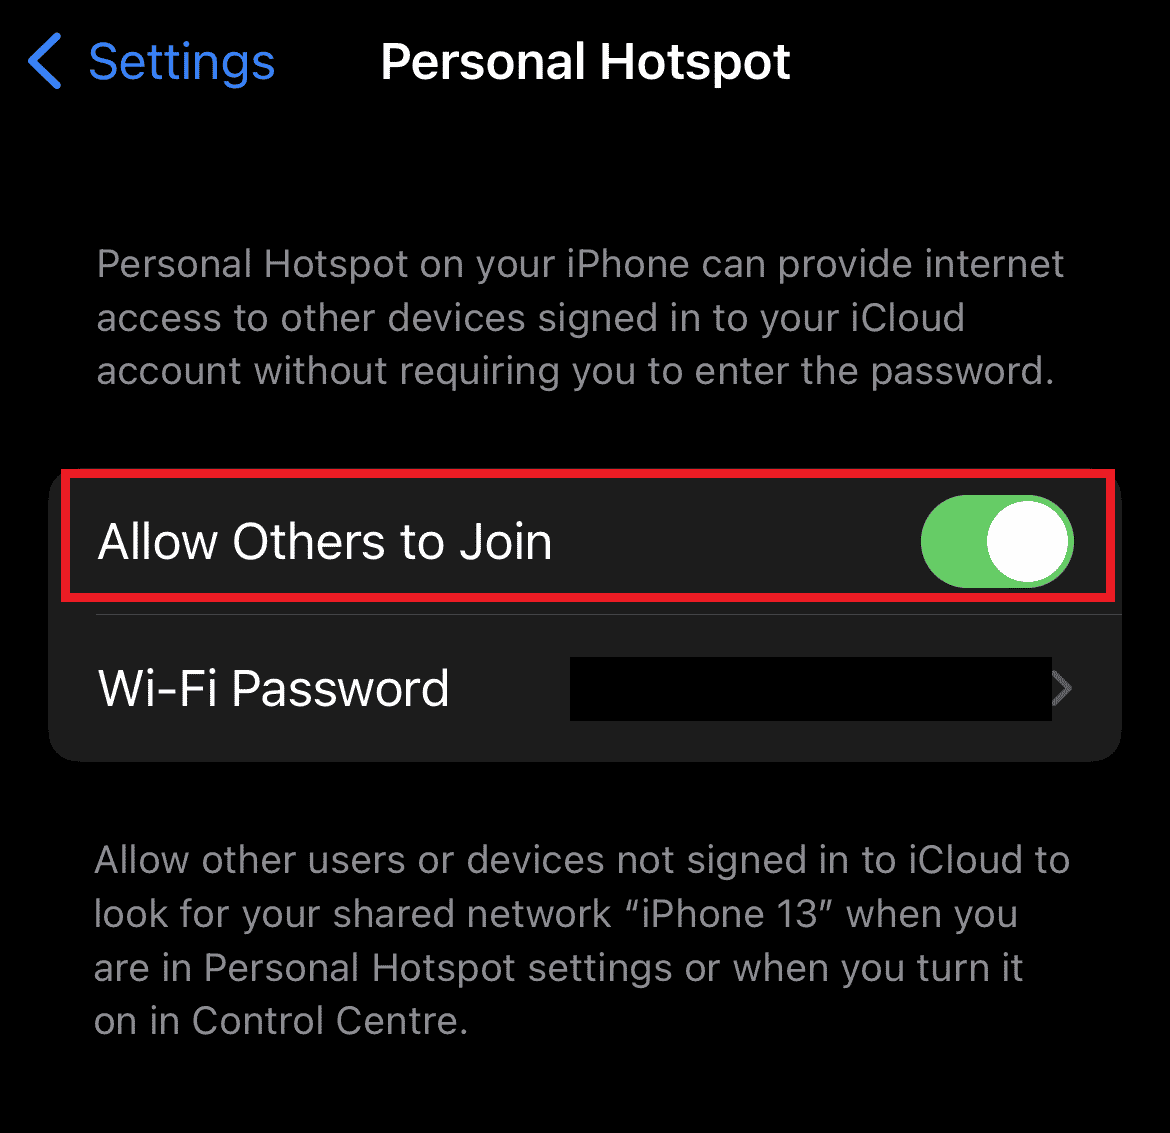 Toggle on Allow Others to Join